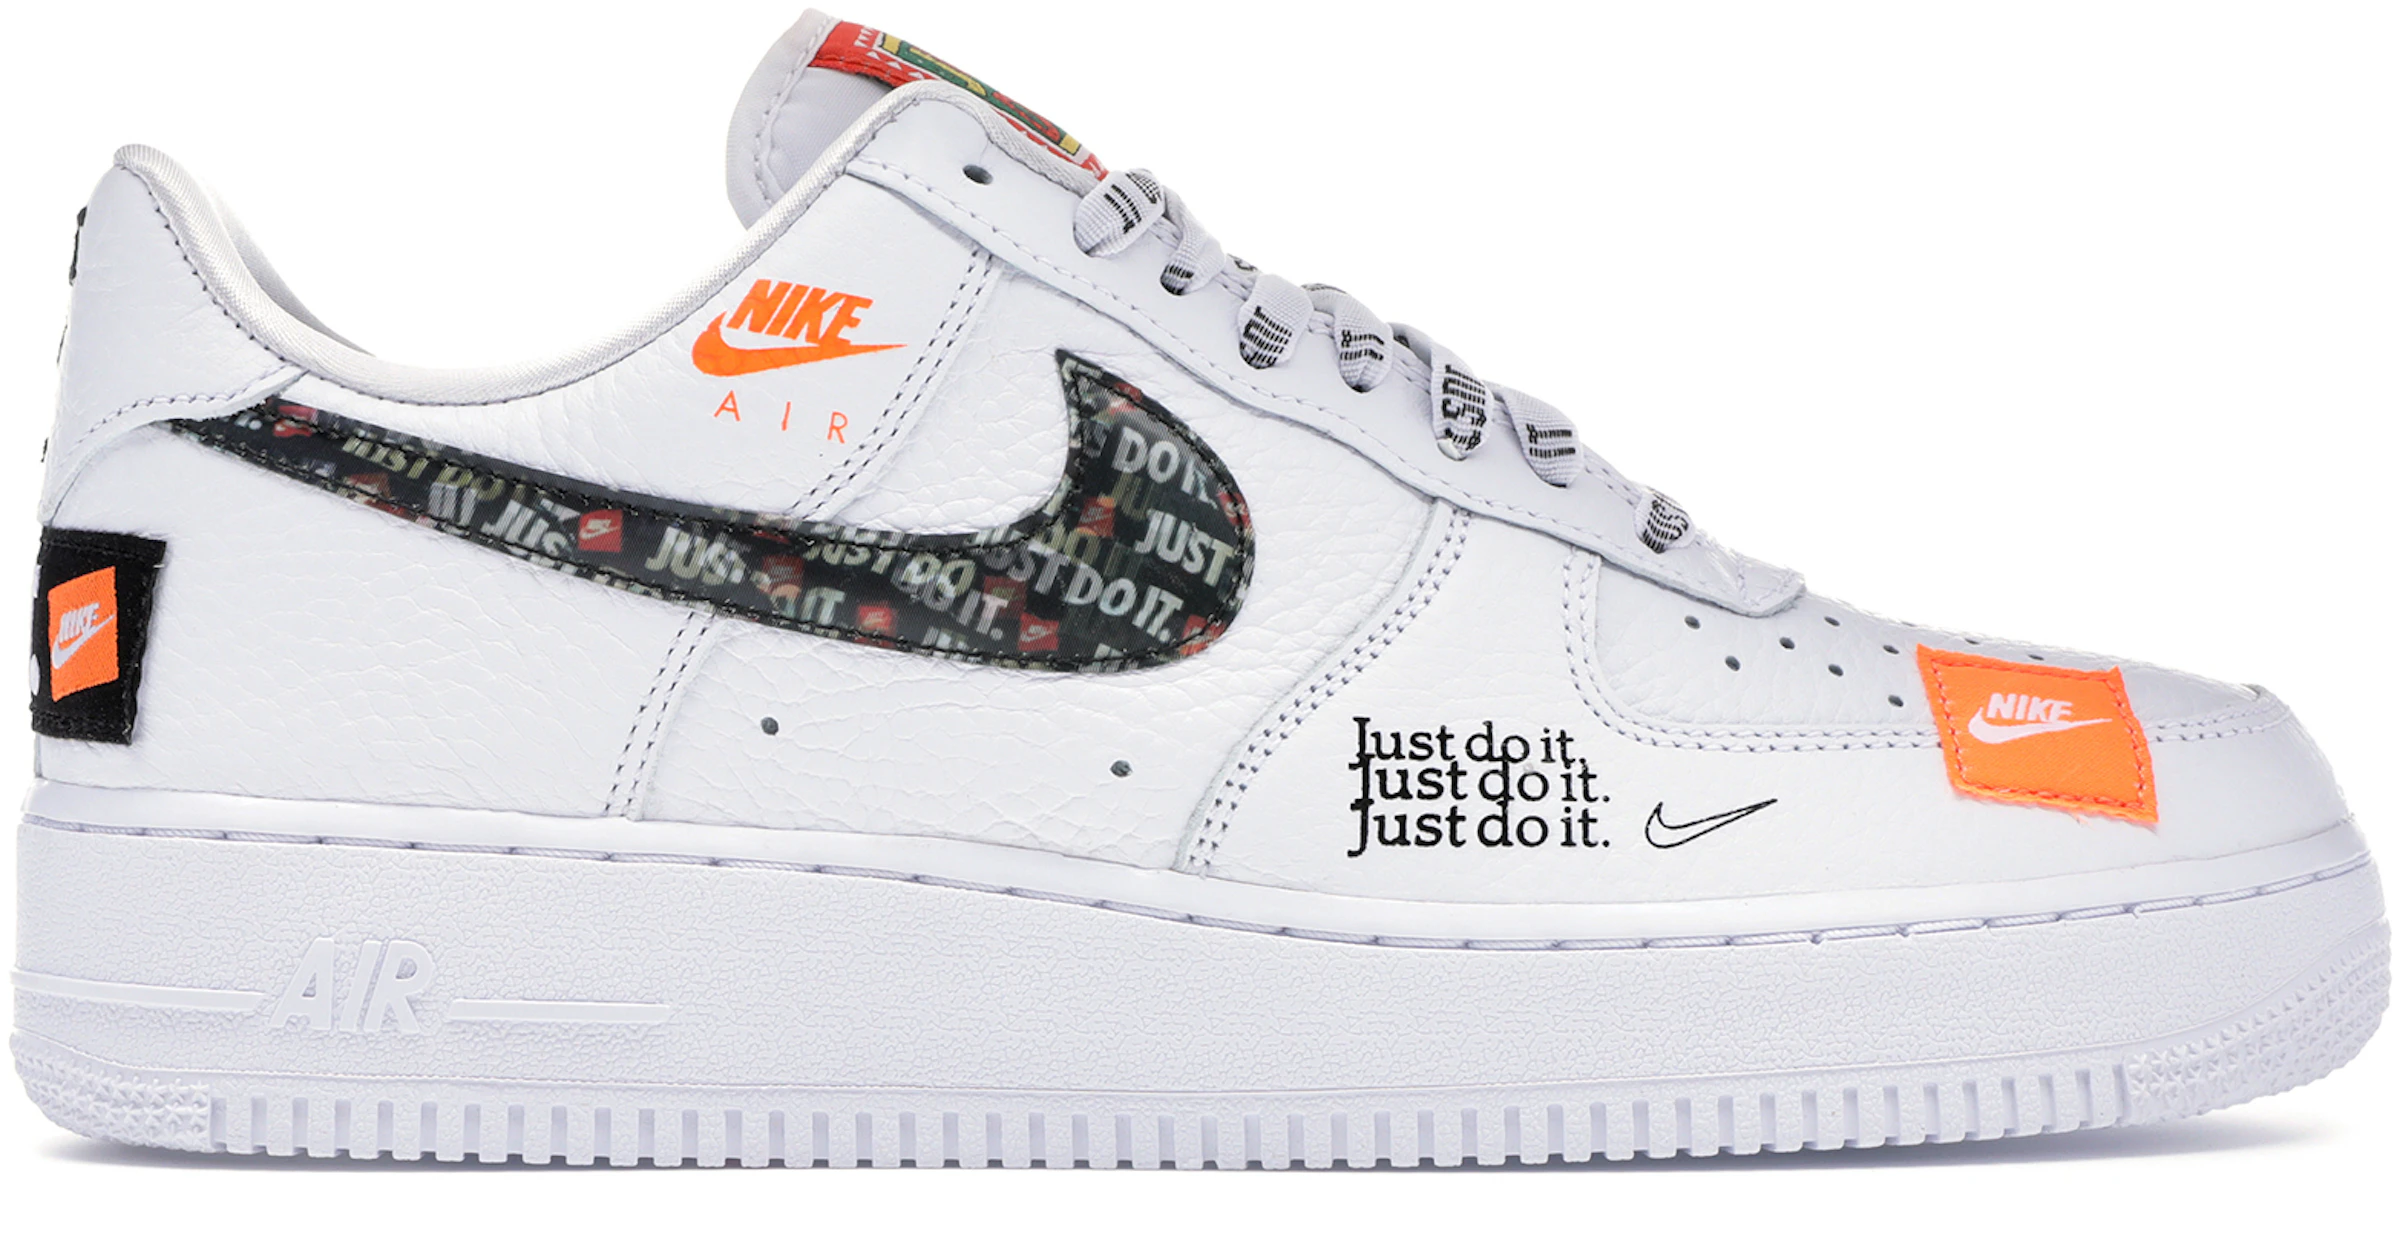 Nike Air 1 Just Do It Pack White/Black - AR7719-100 US